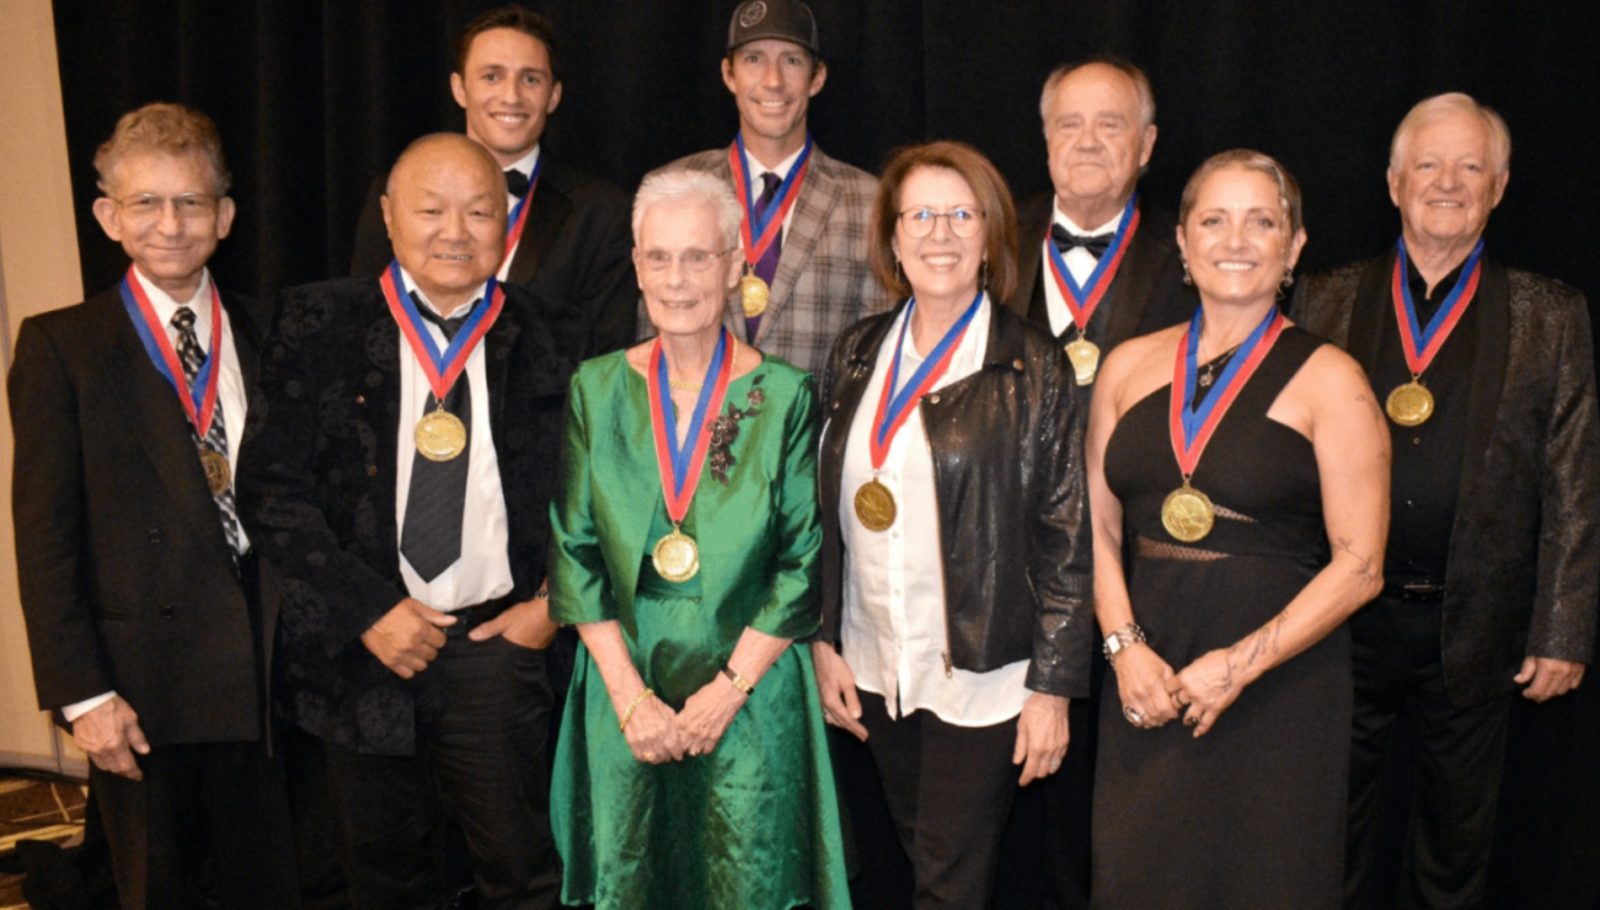 At the World Acrobatics Society's 2022 Hall of Fame Ceremony, the nine inducted athletes and performers wear their medals for a group photo